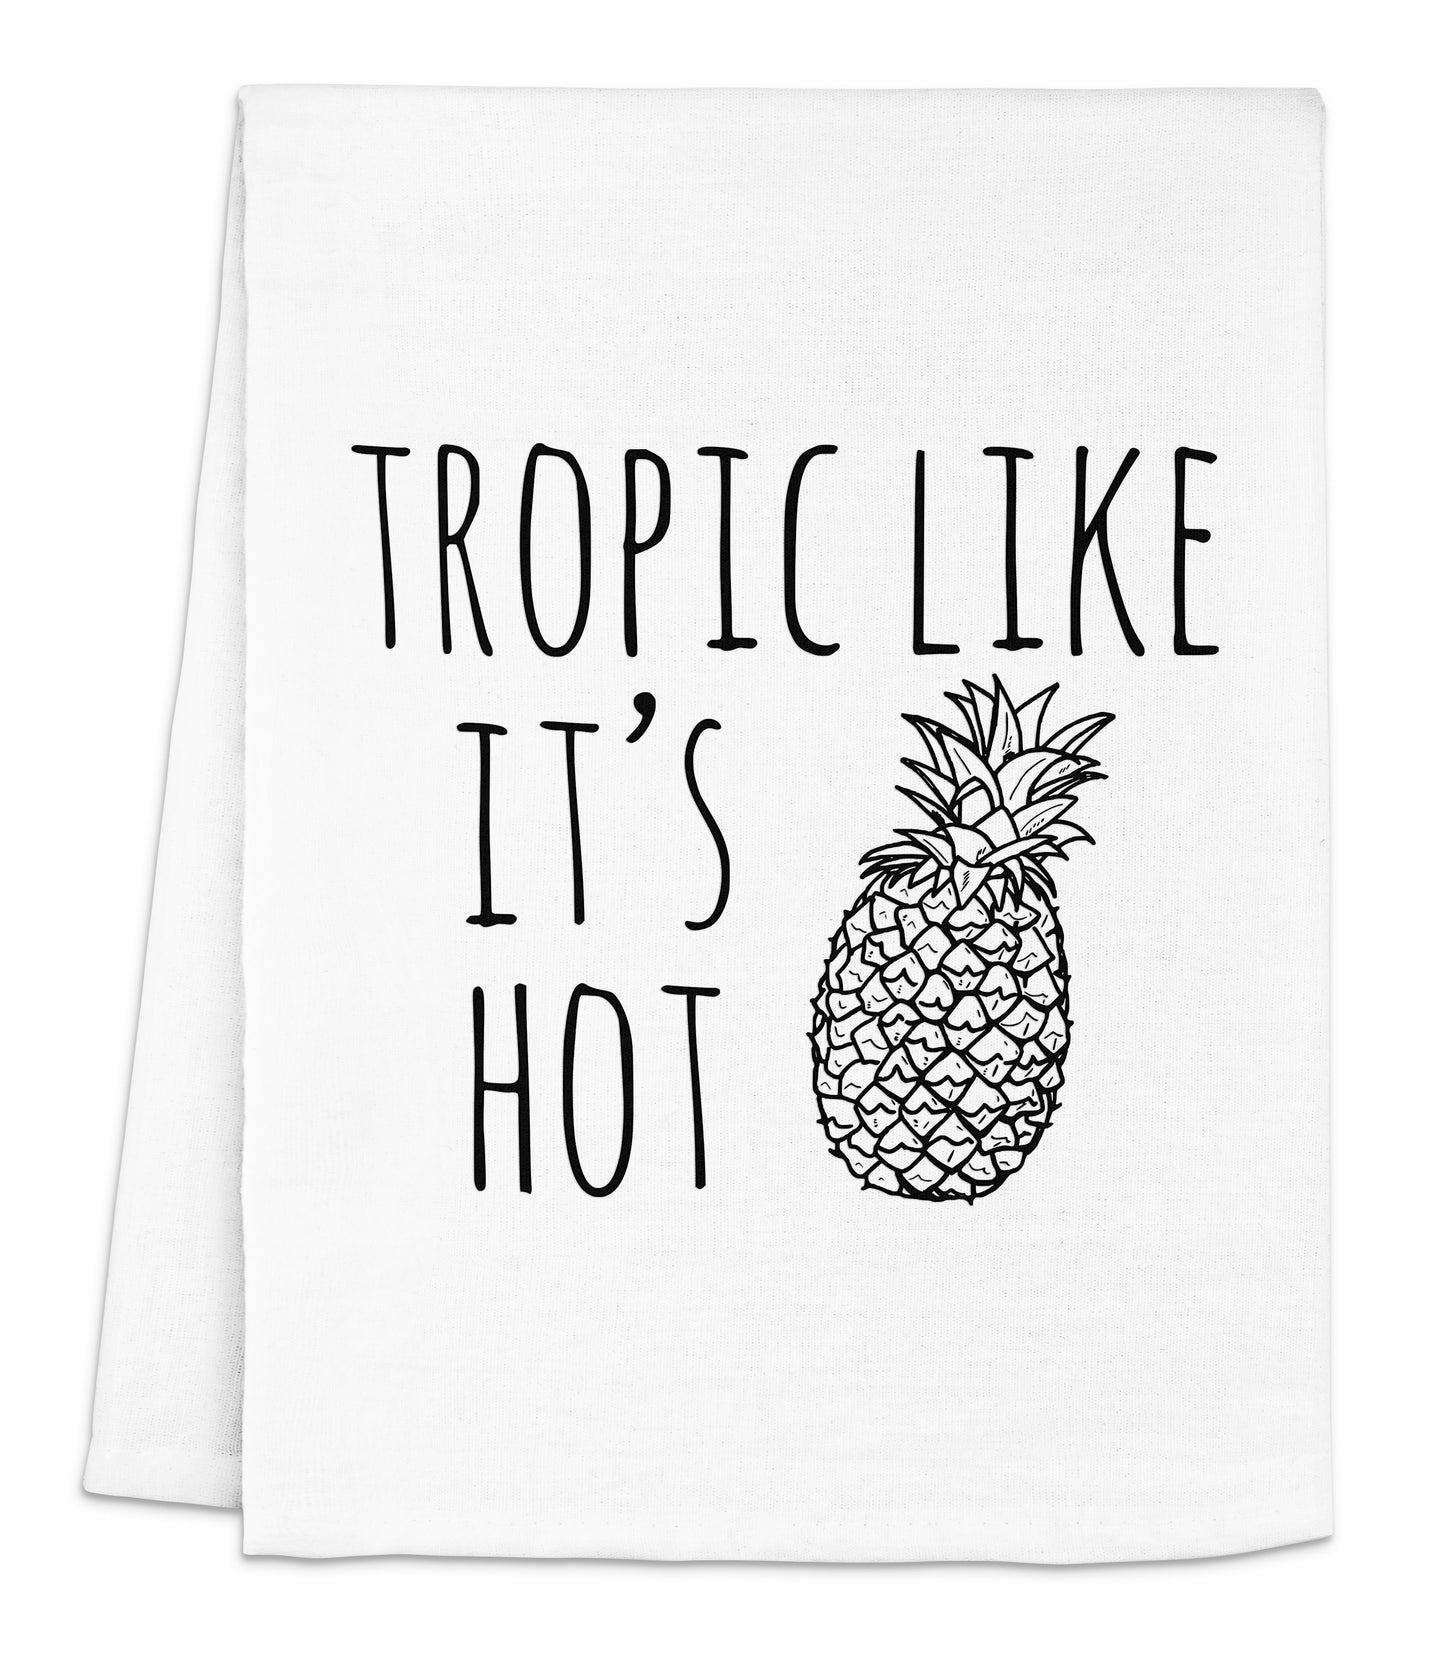 a towel with a pineapple printed on it